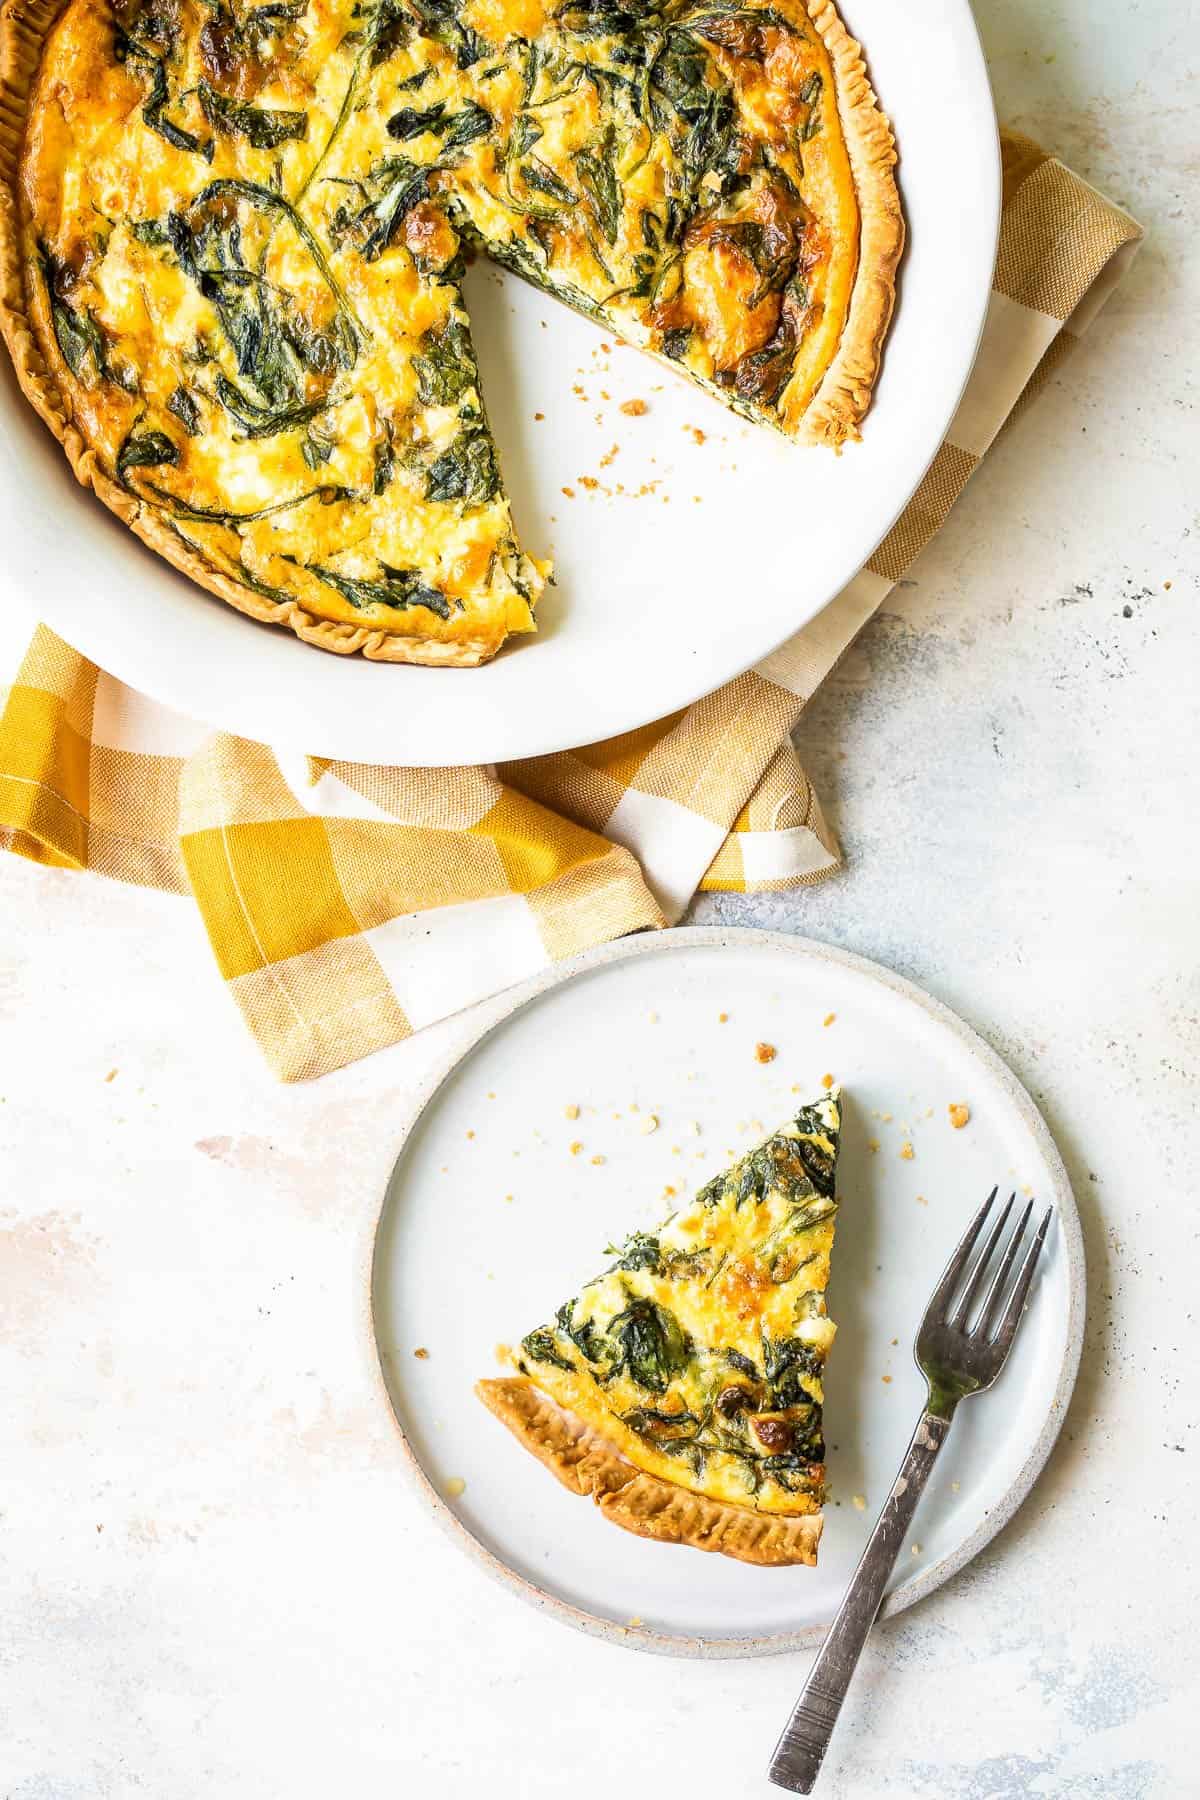 Plate of spinach quiche.